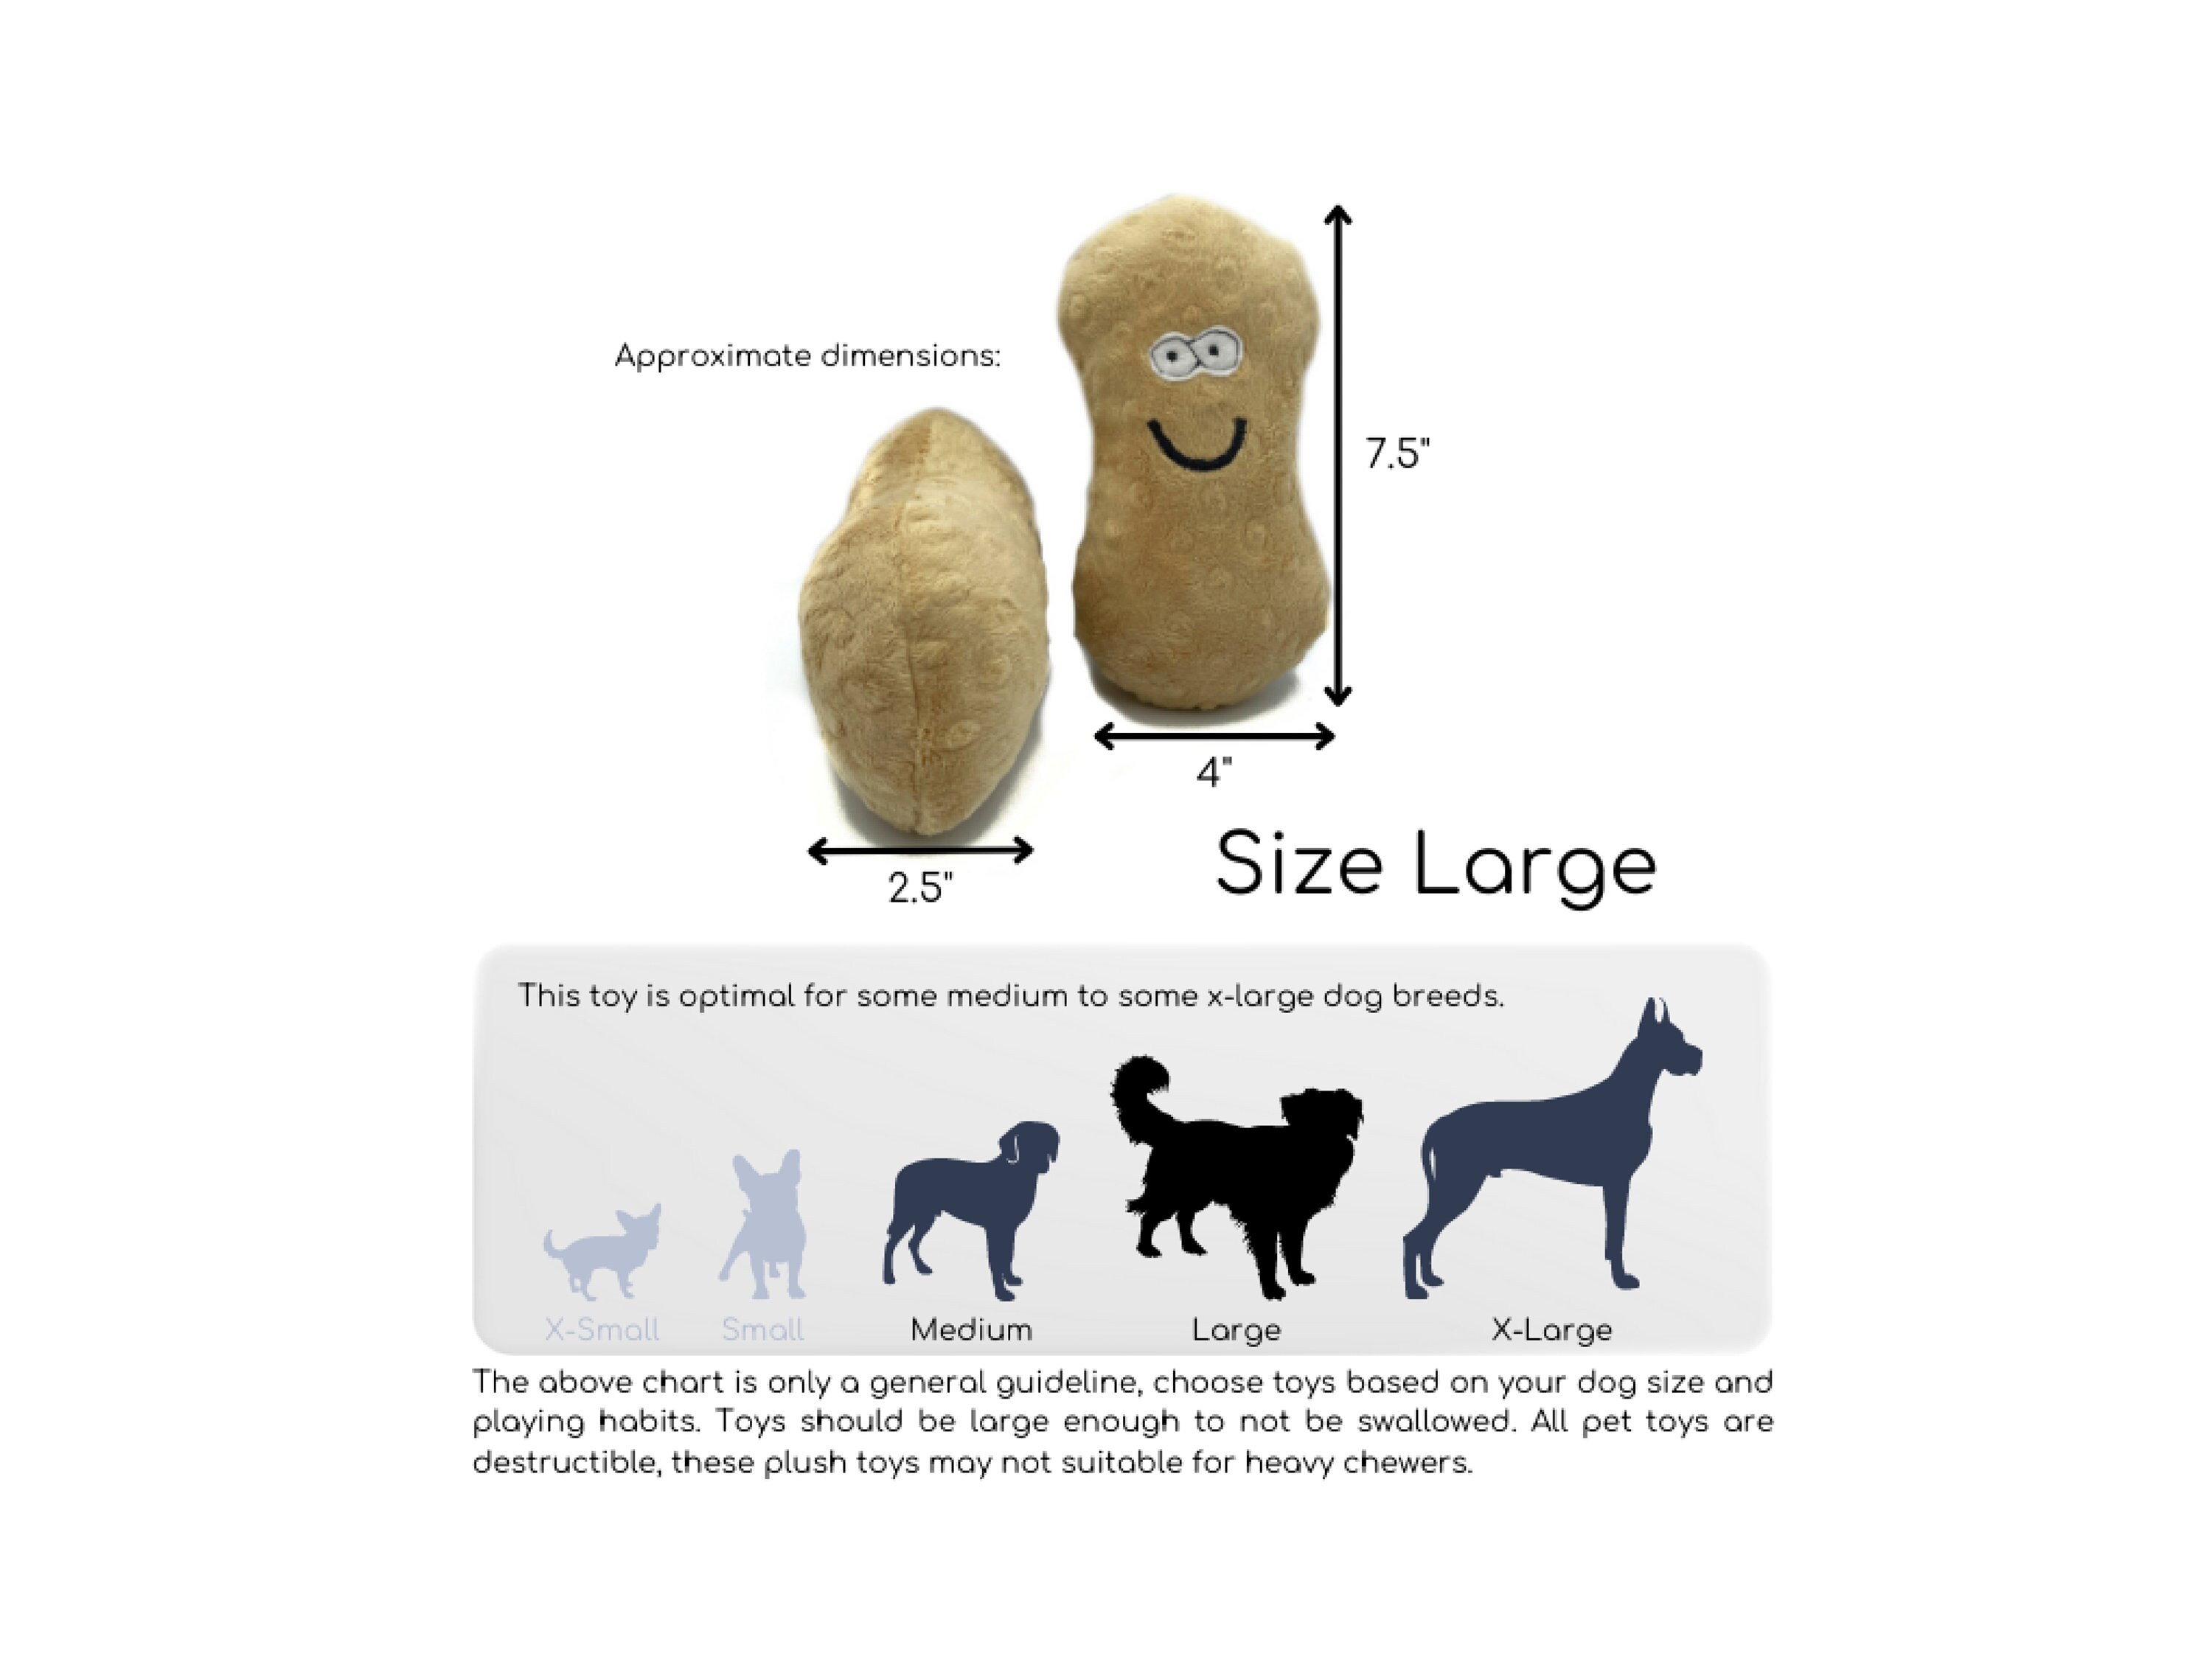 Shelley the Squeaky Peanut Plush Dog Toy 